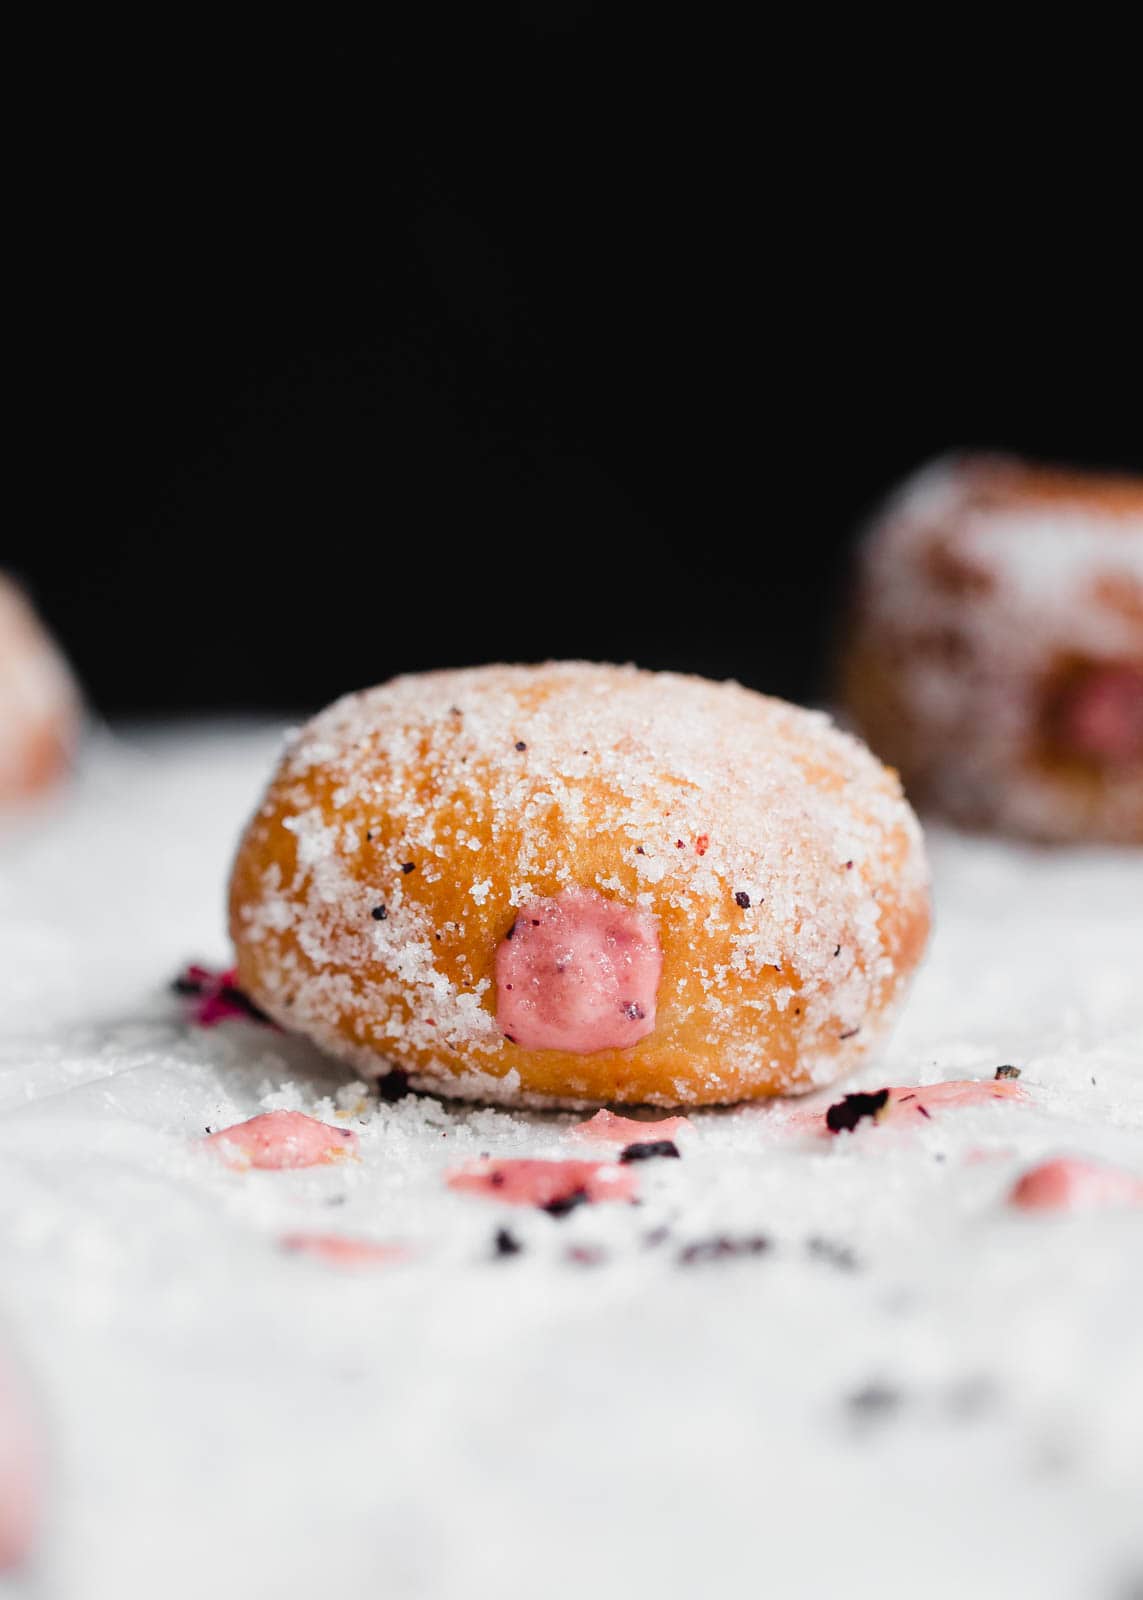 Golden and fried to perfection, these yeasted donuts are tossed in a hibiscus sugar and stuffed with a hibiscus pastry cream. Uhm, DROOL.